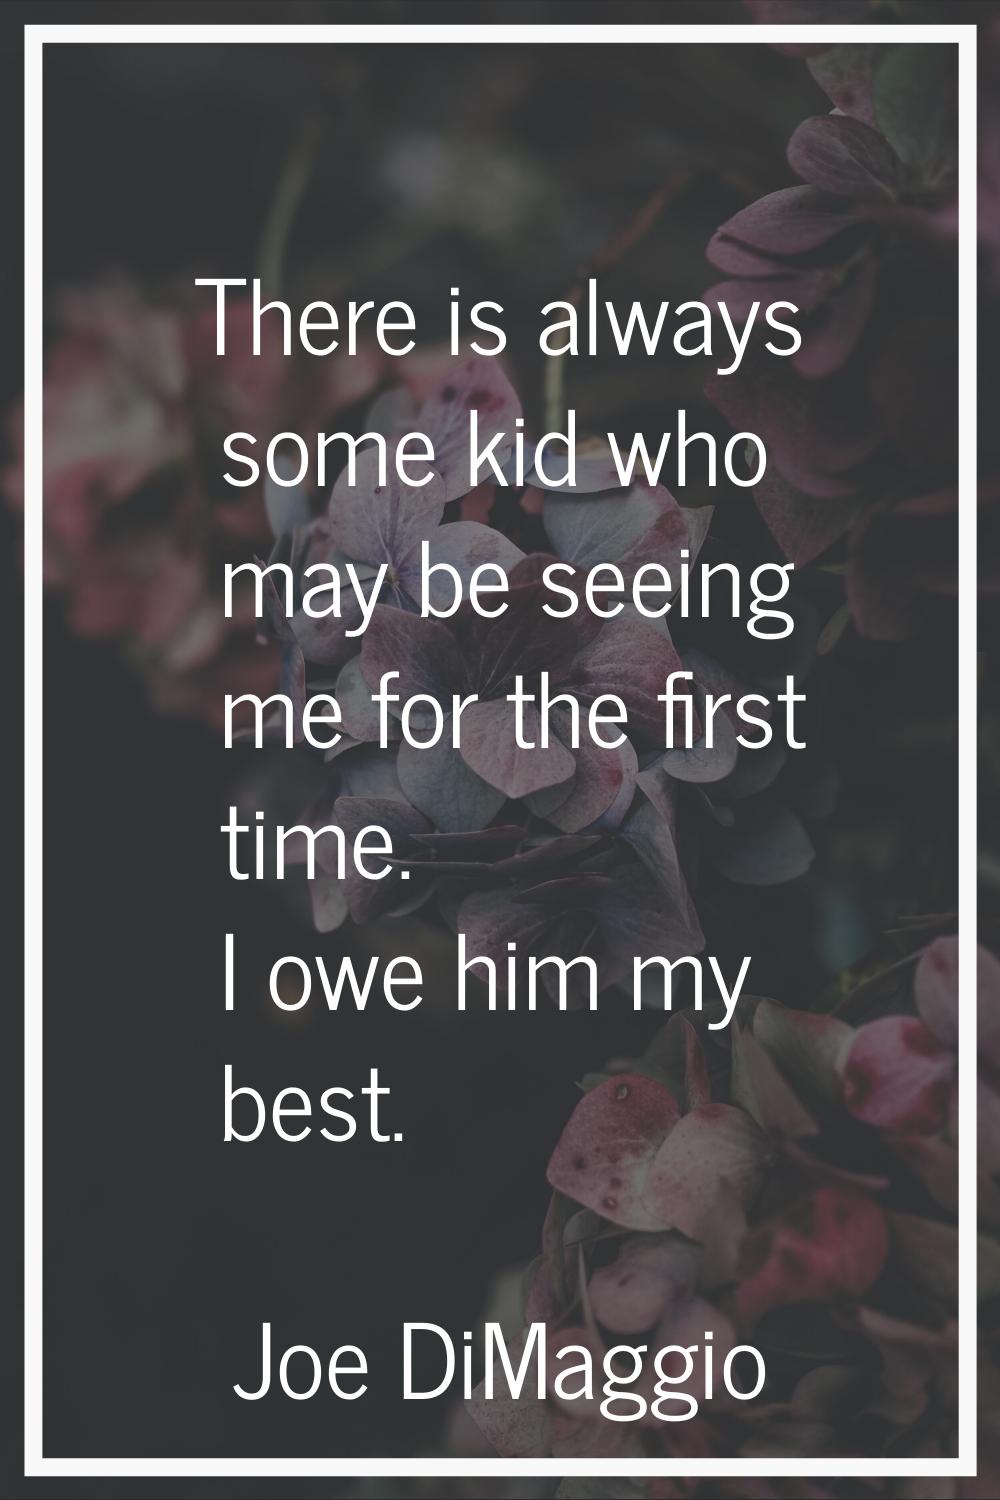 There is always some kid who may be seeing me for the first time. I owe him my best.